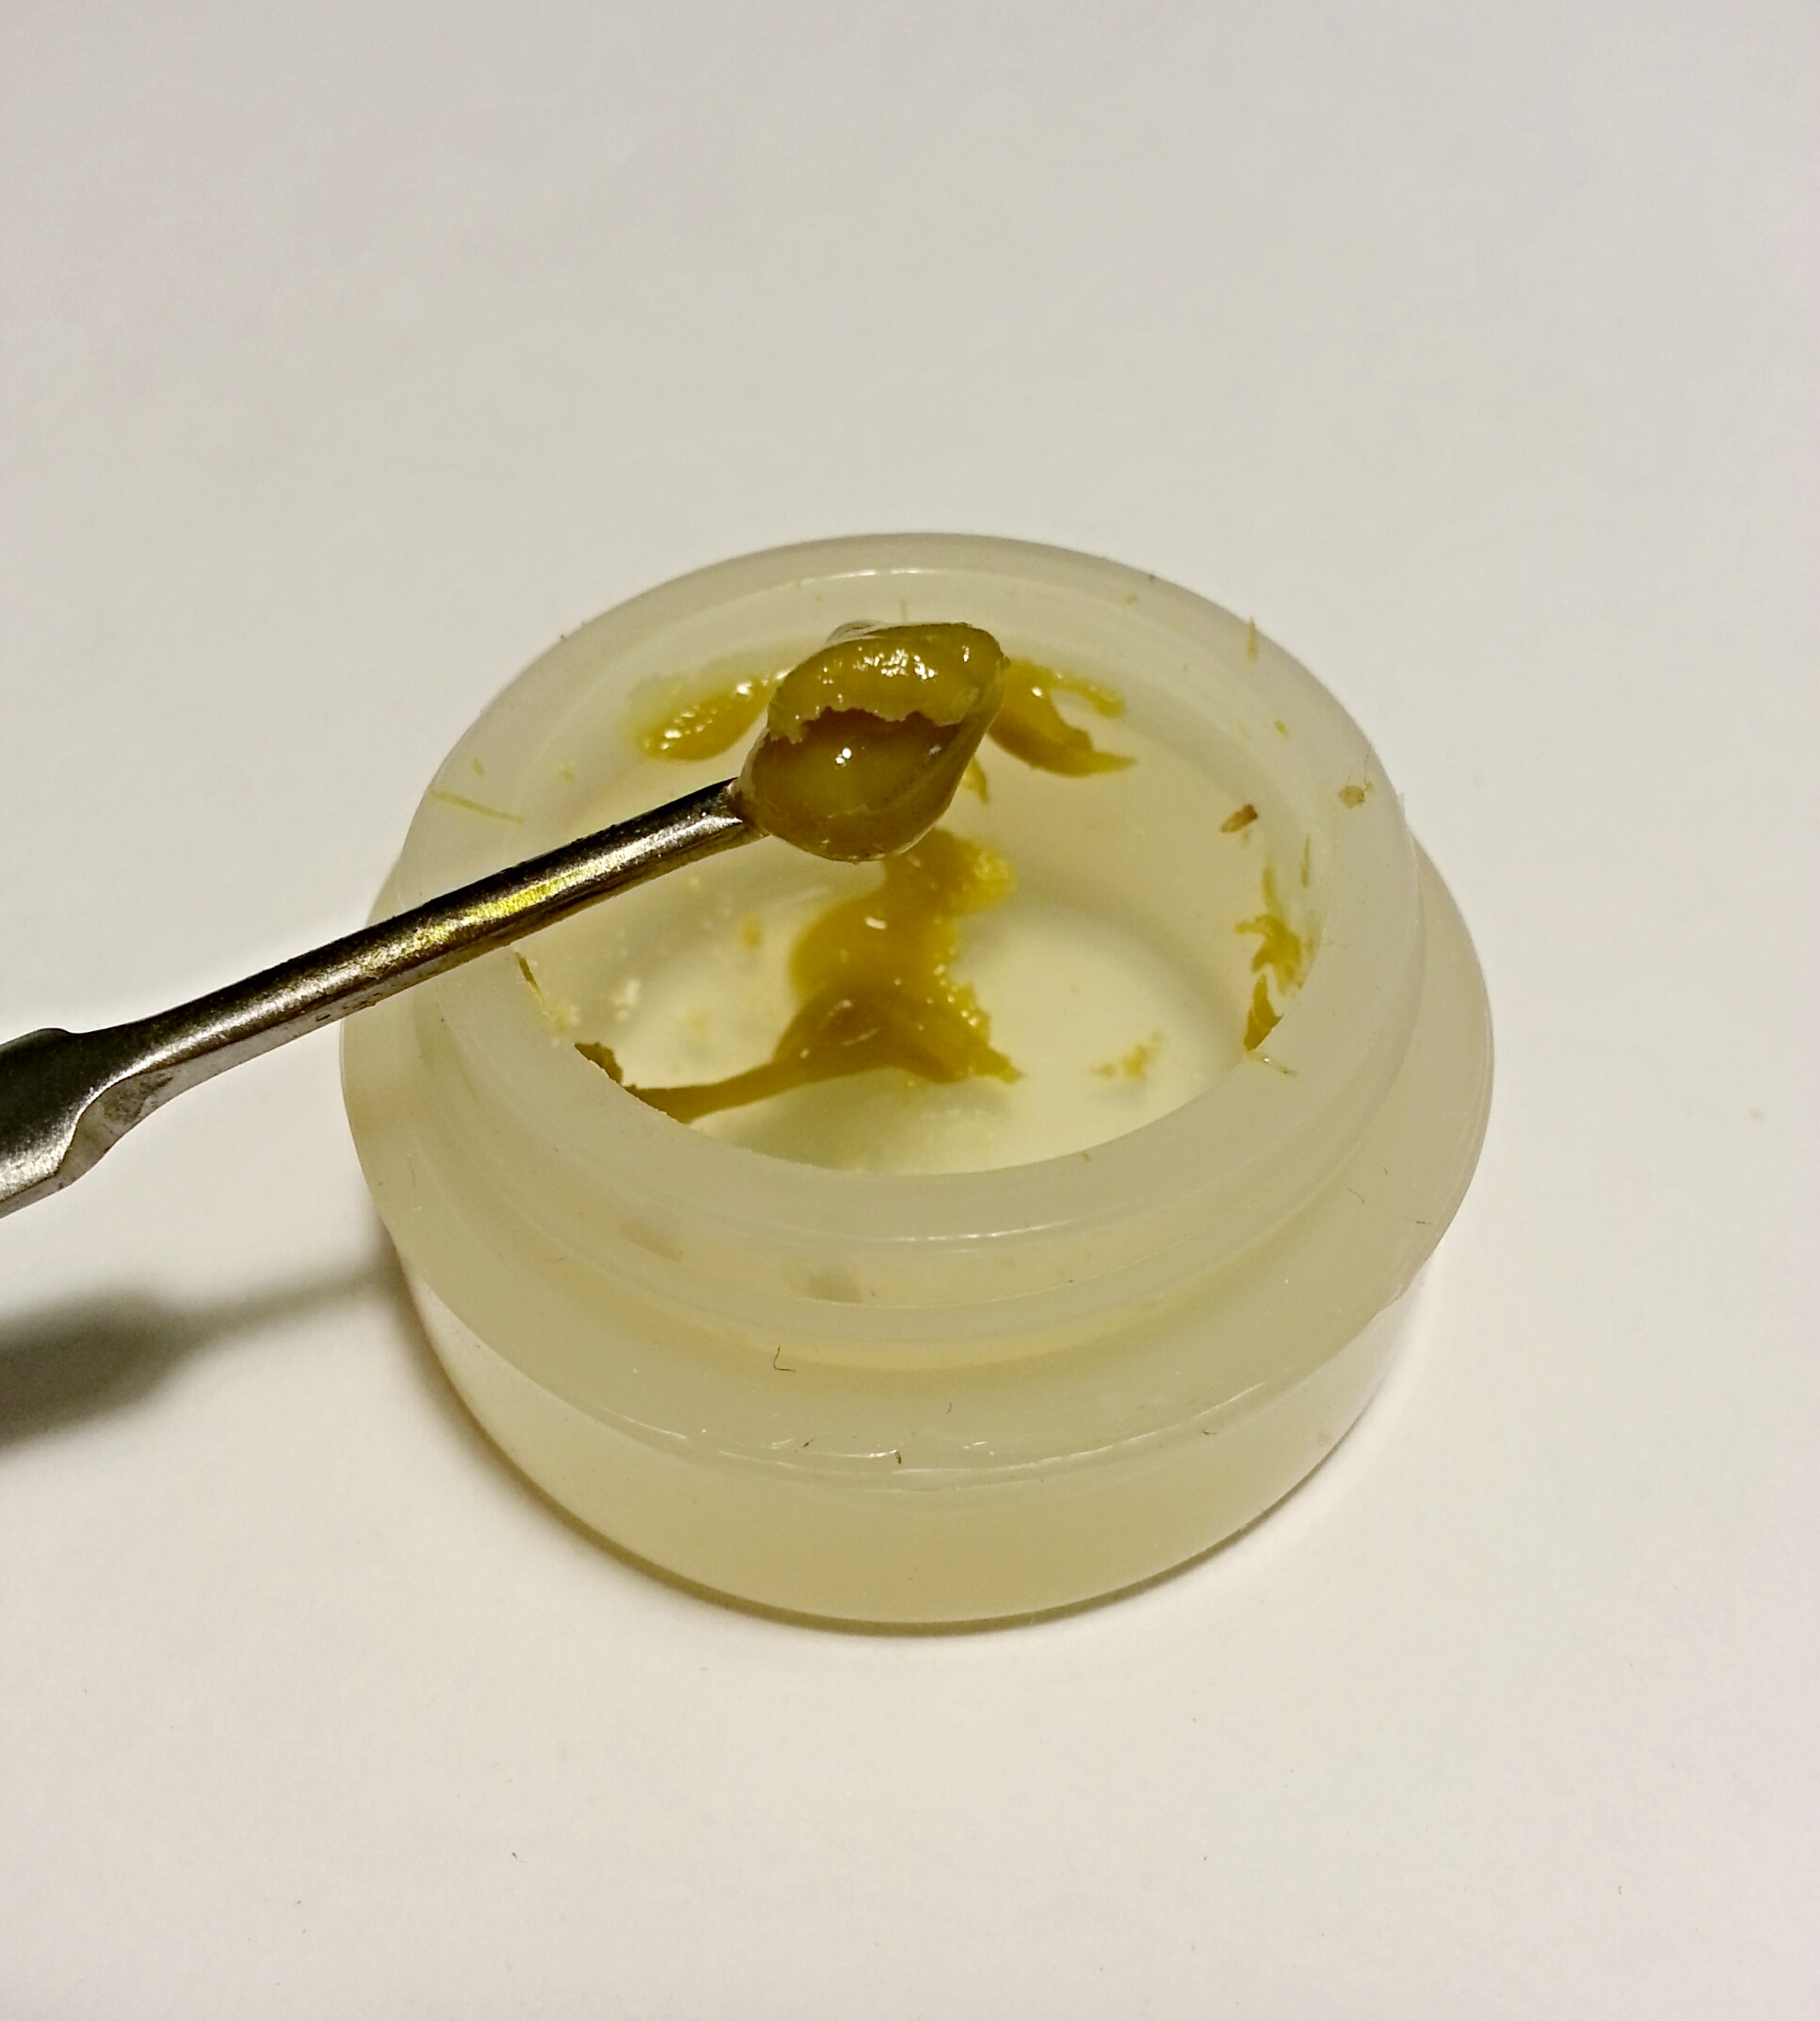 Mr. Miyagi Wax from PSA Concentrate Review